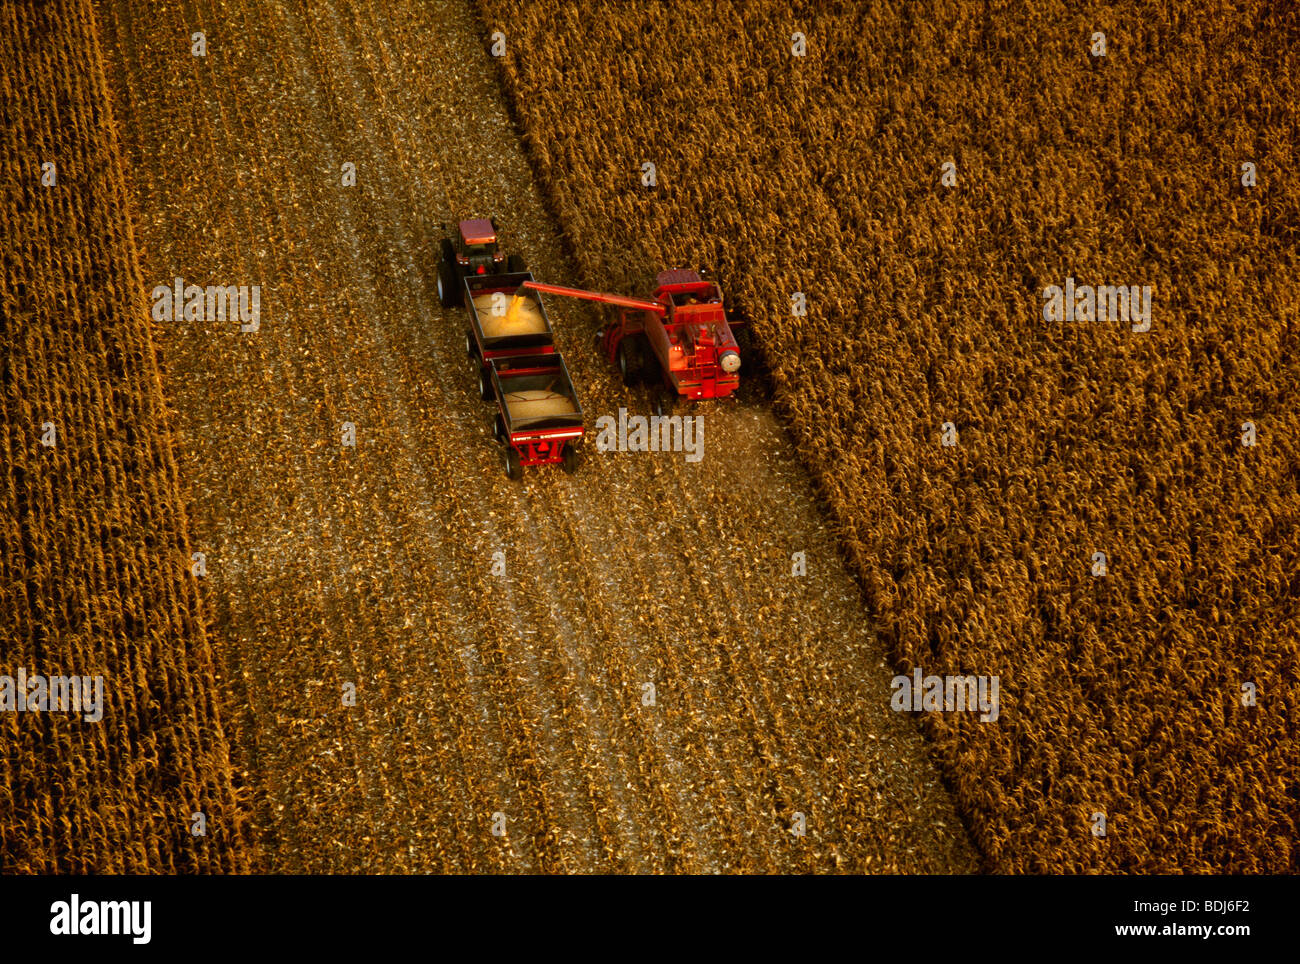 Agriculture - Aerial view of a combine harvesting grain corn and augering it into a grain wagon “on-the-go” / Illinois, USA. Stock Photo